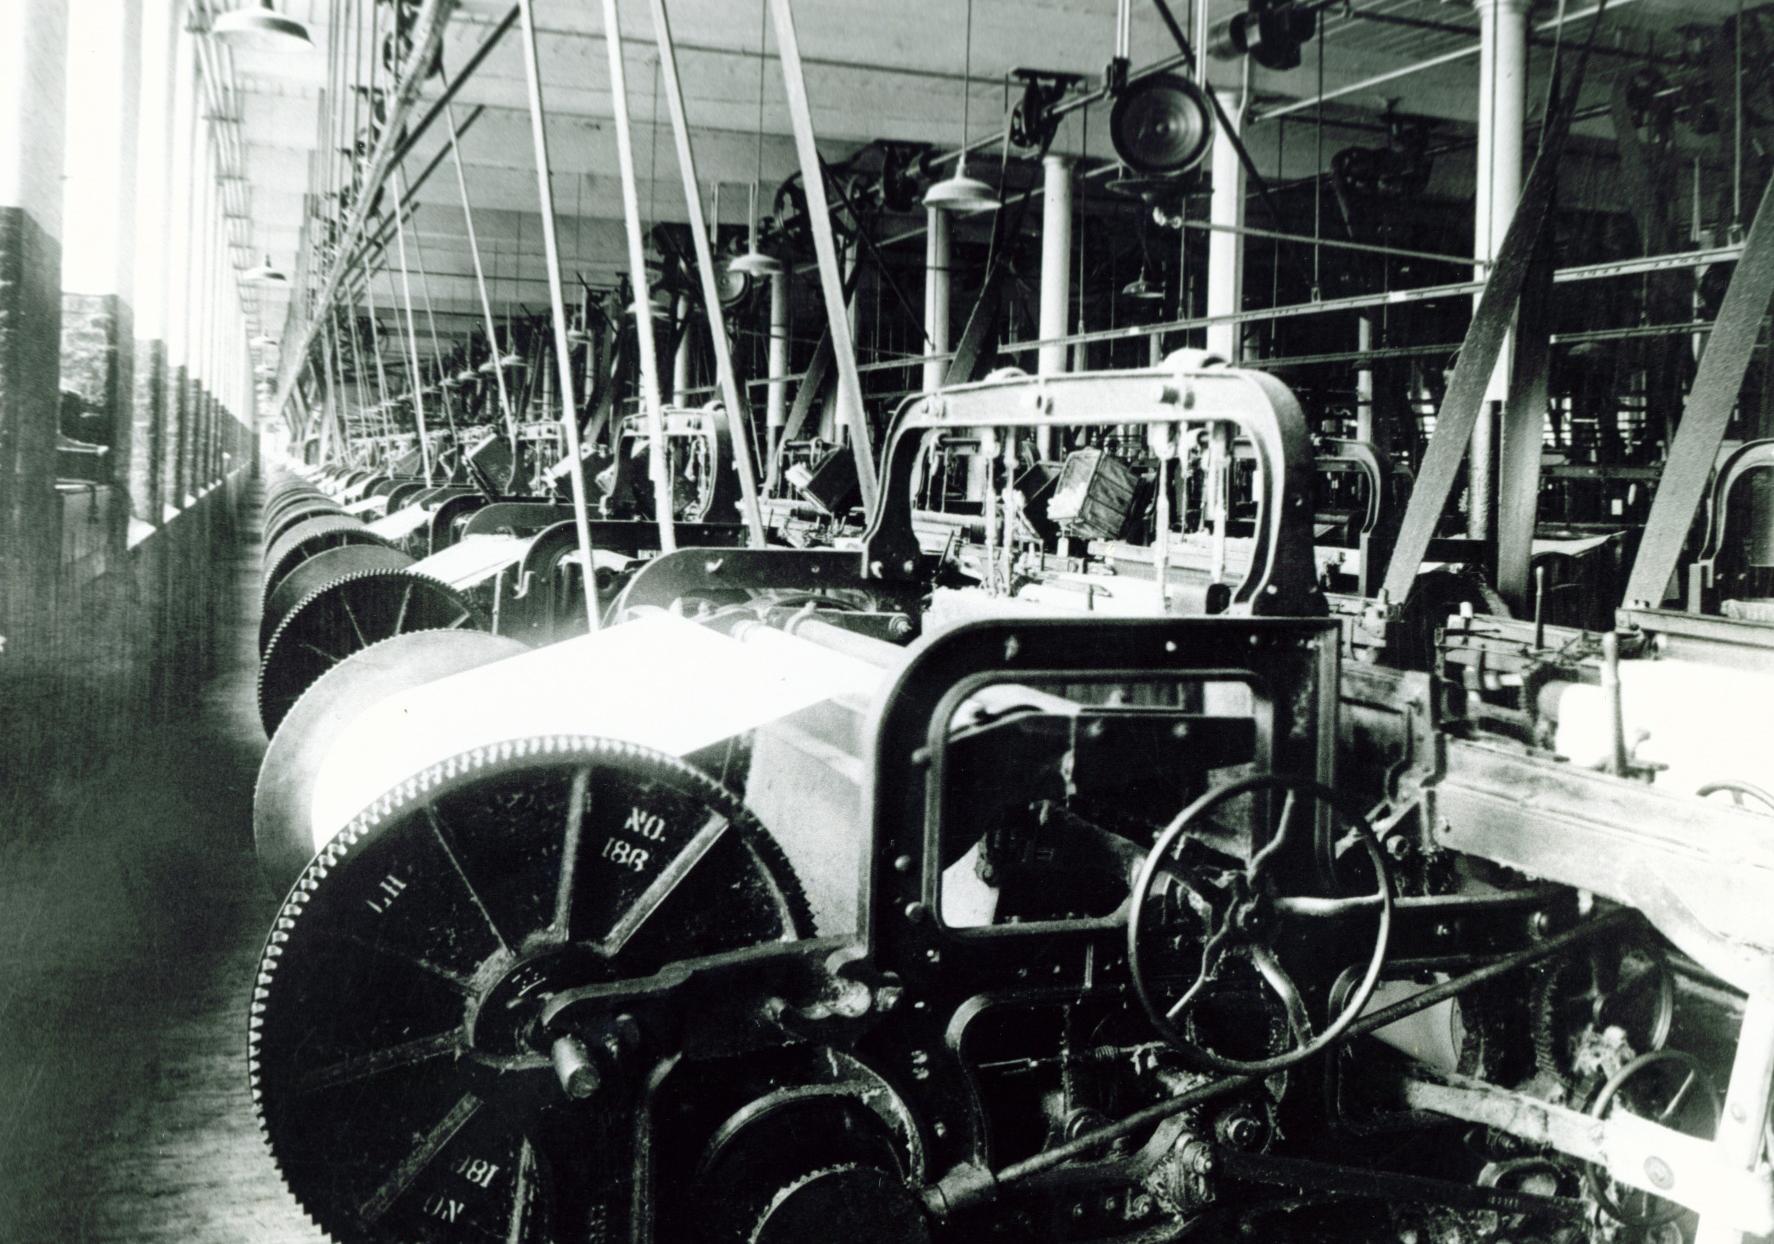 Black and white image of Columbia Mills interior showing loom machinery